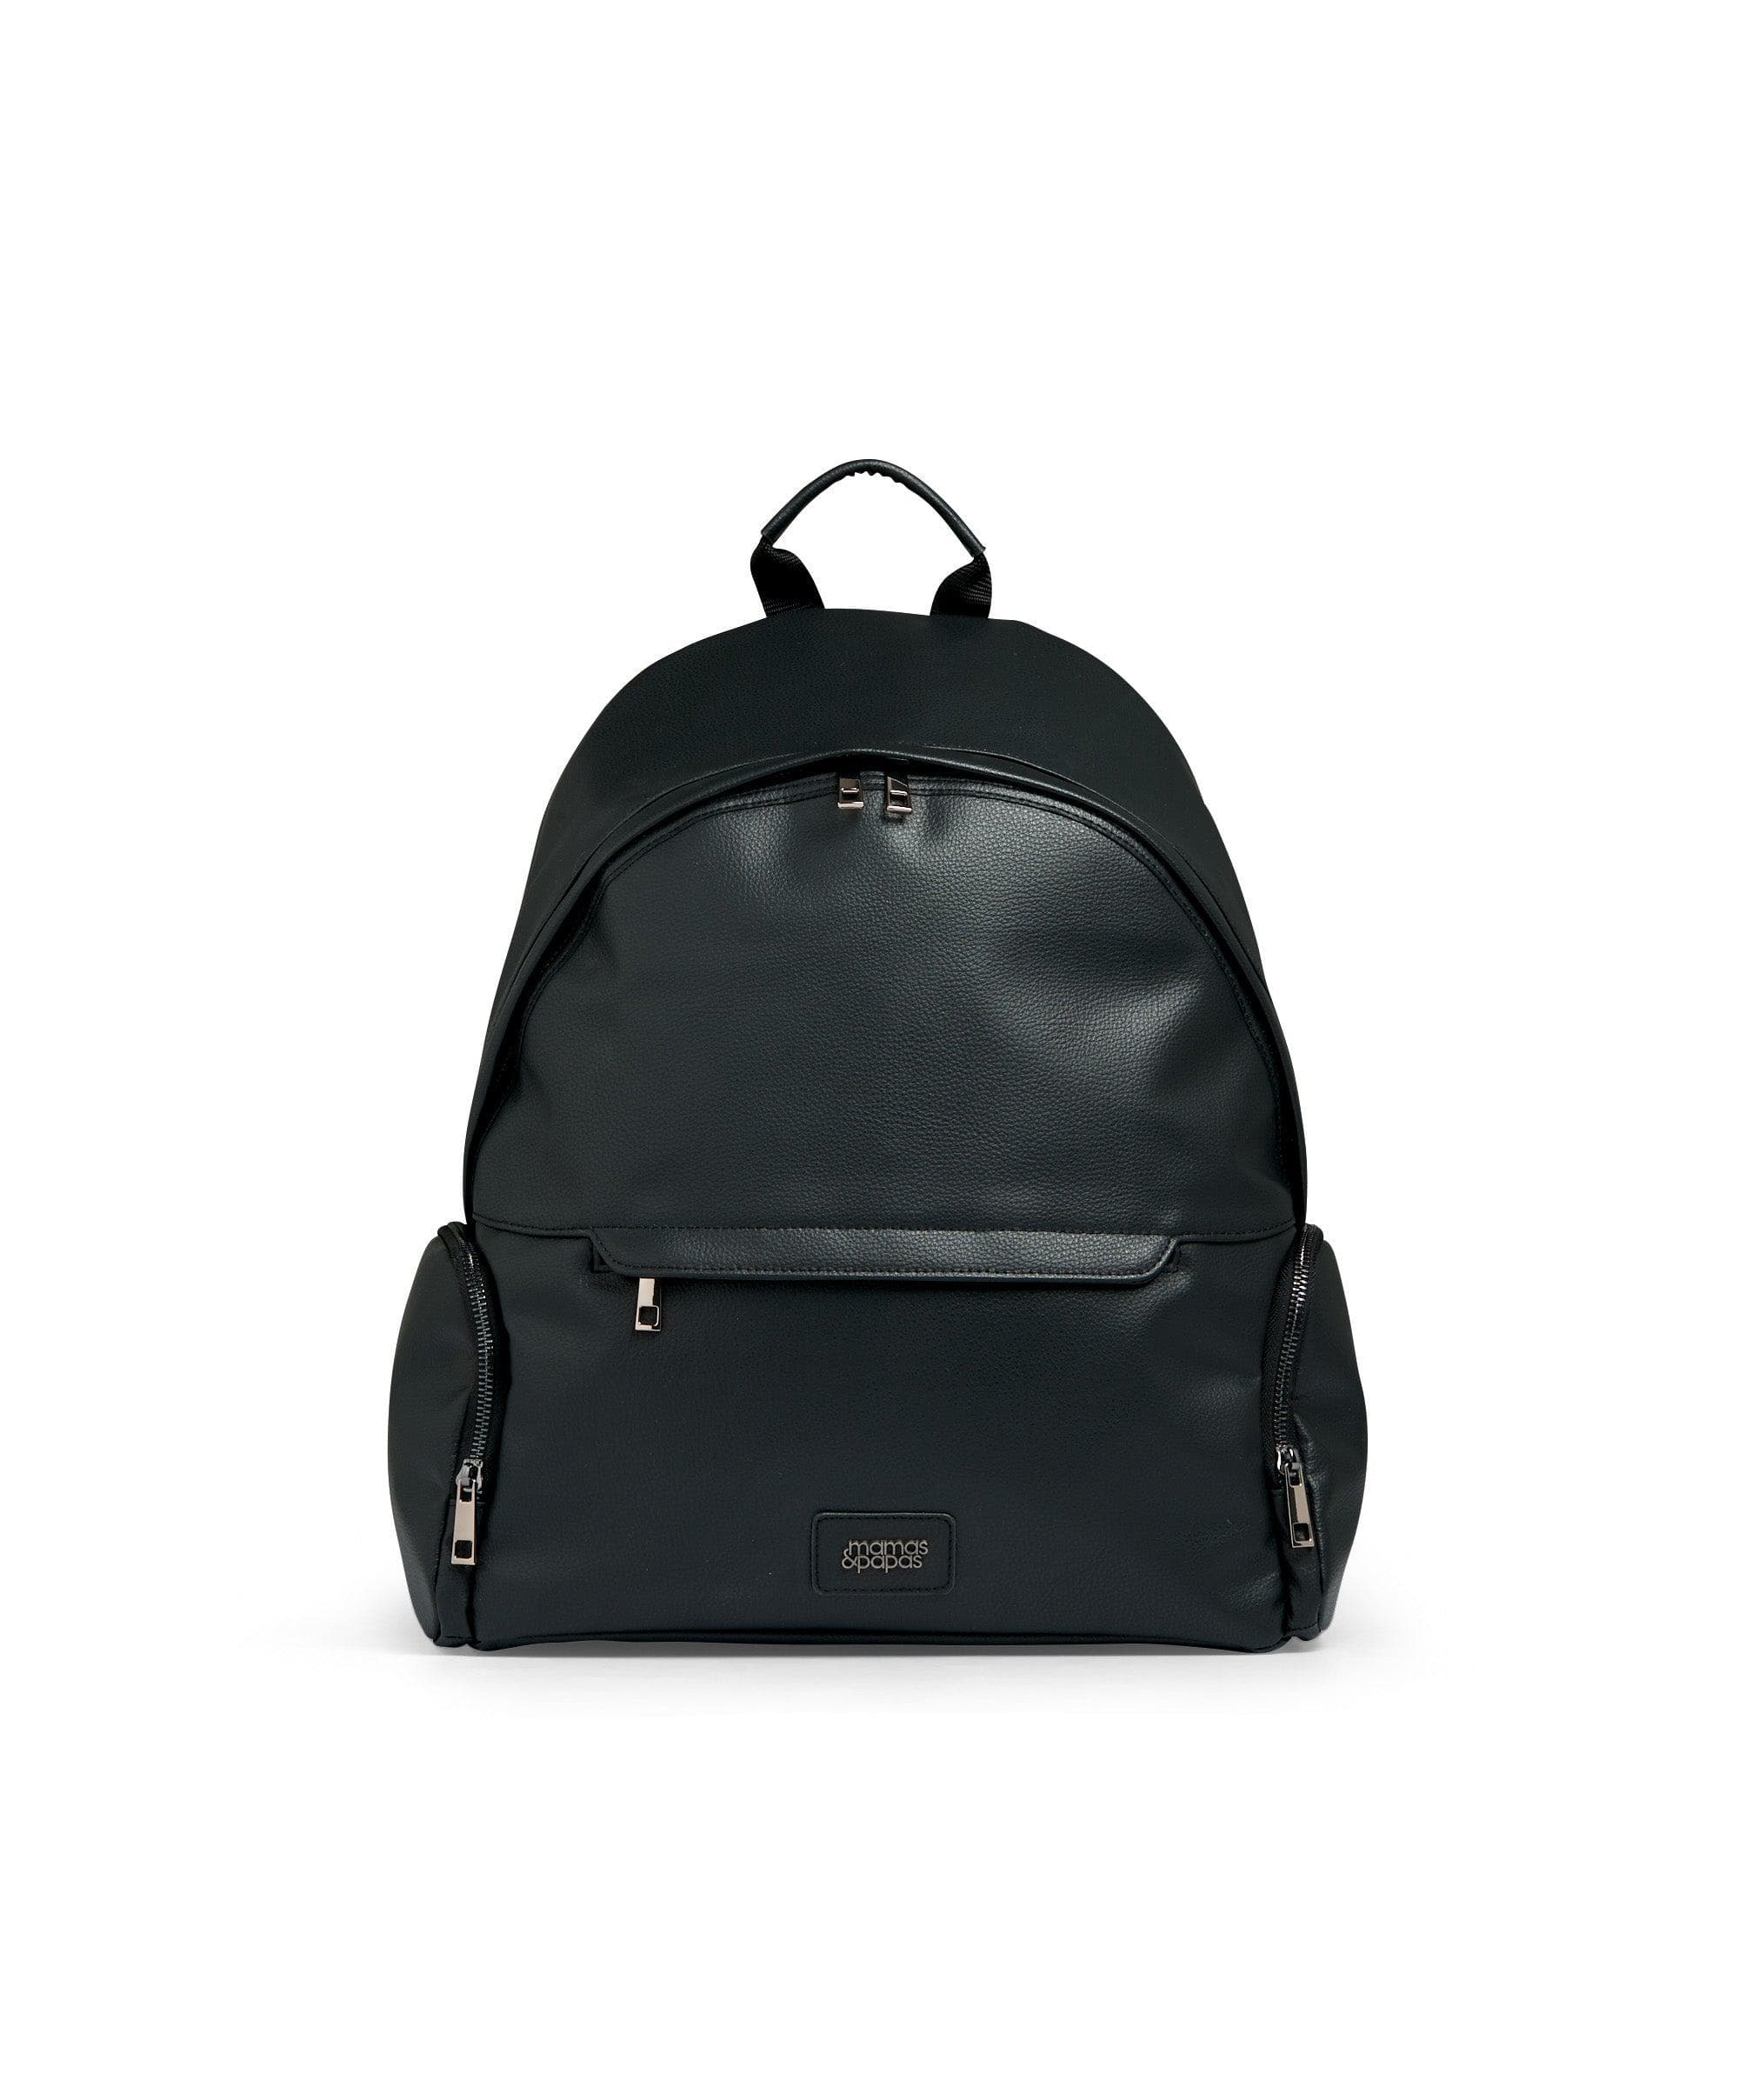 Ocarro Luxe Changing Backpack - Black